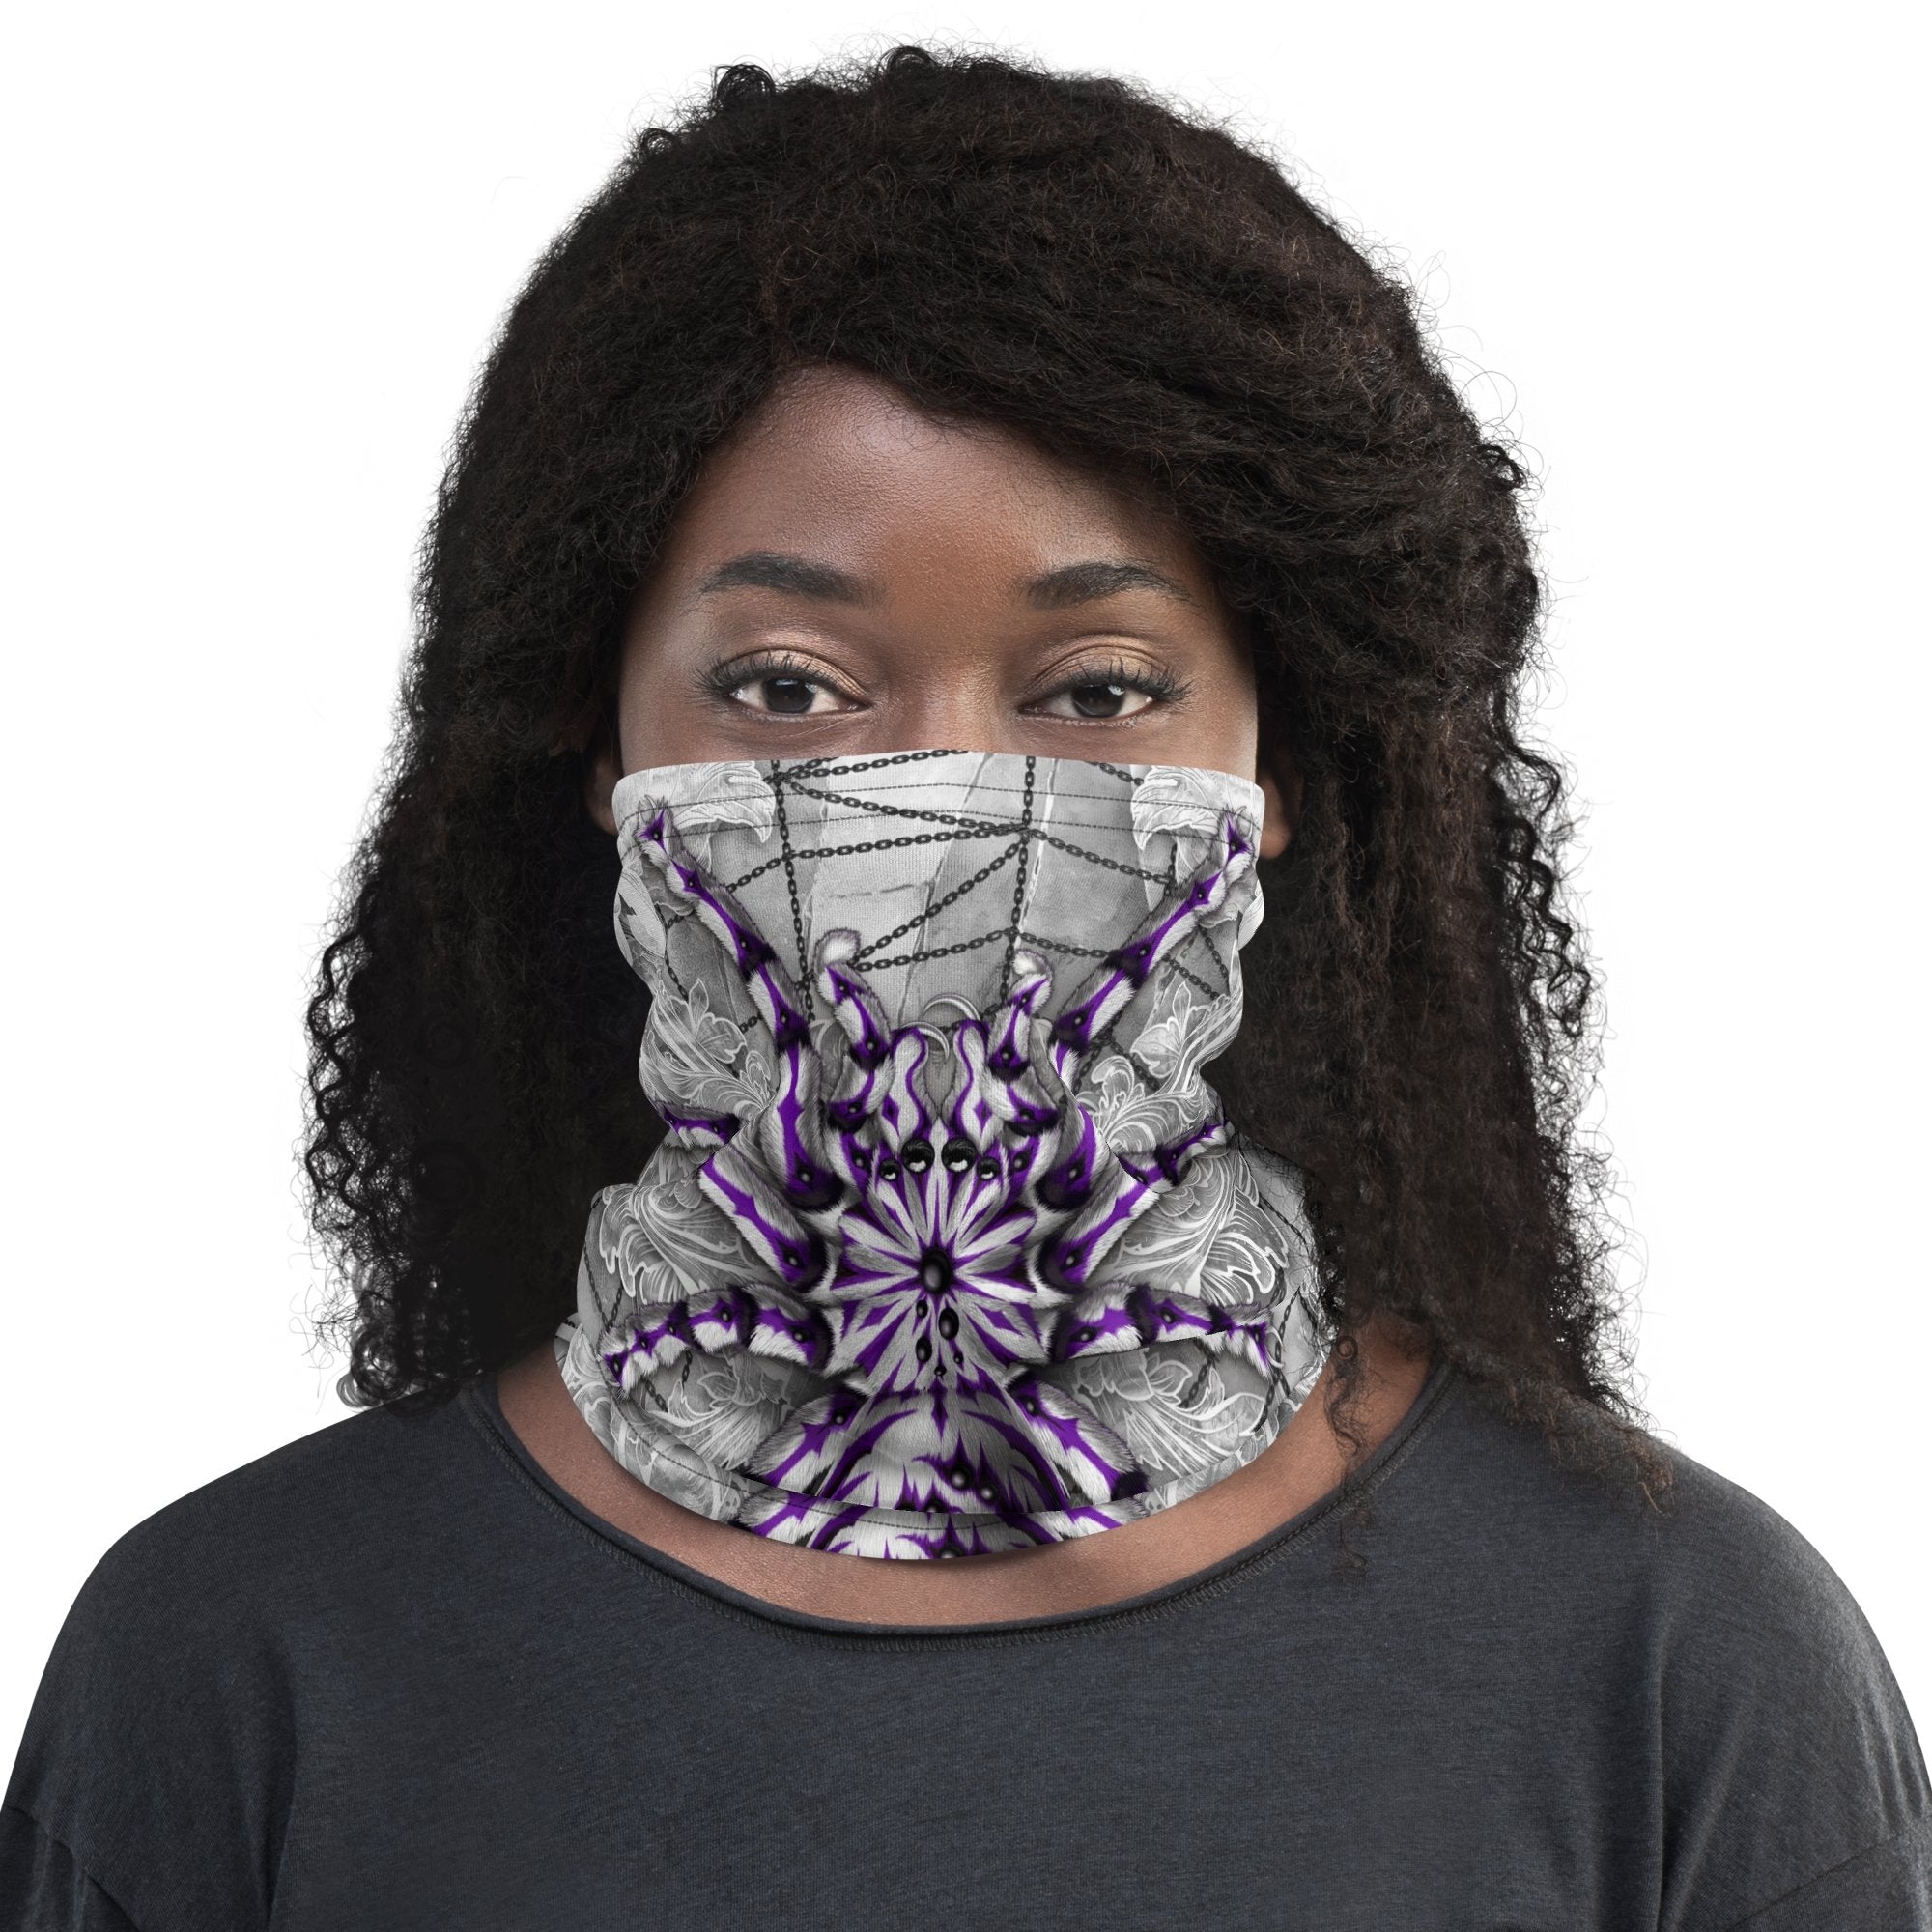 White Goth Neck Gaiter, Face Mask, Head Covering, Halloween Outfit, Tarantula Lover Gift - Spider, Stone, White and Purple - Abysm Internal